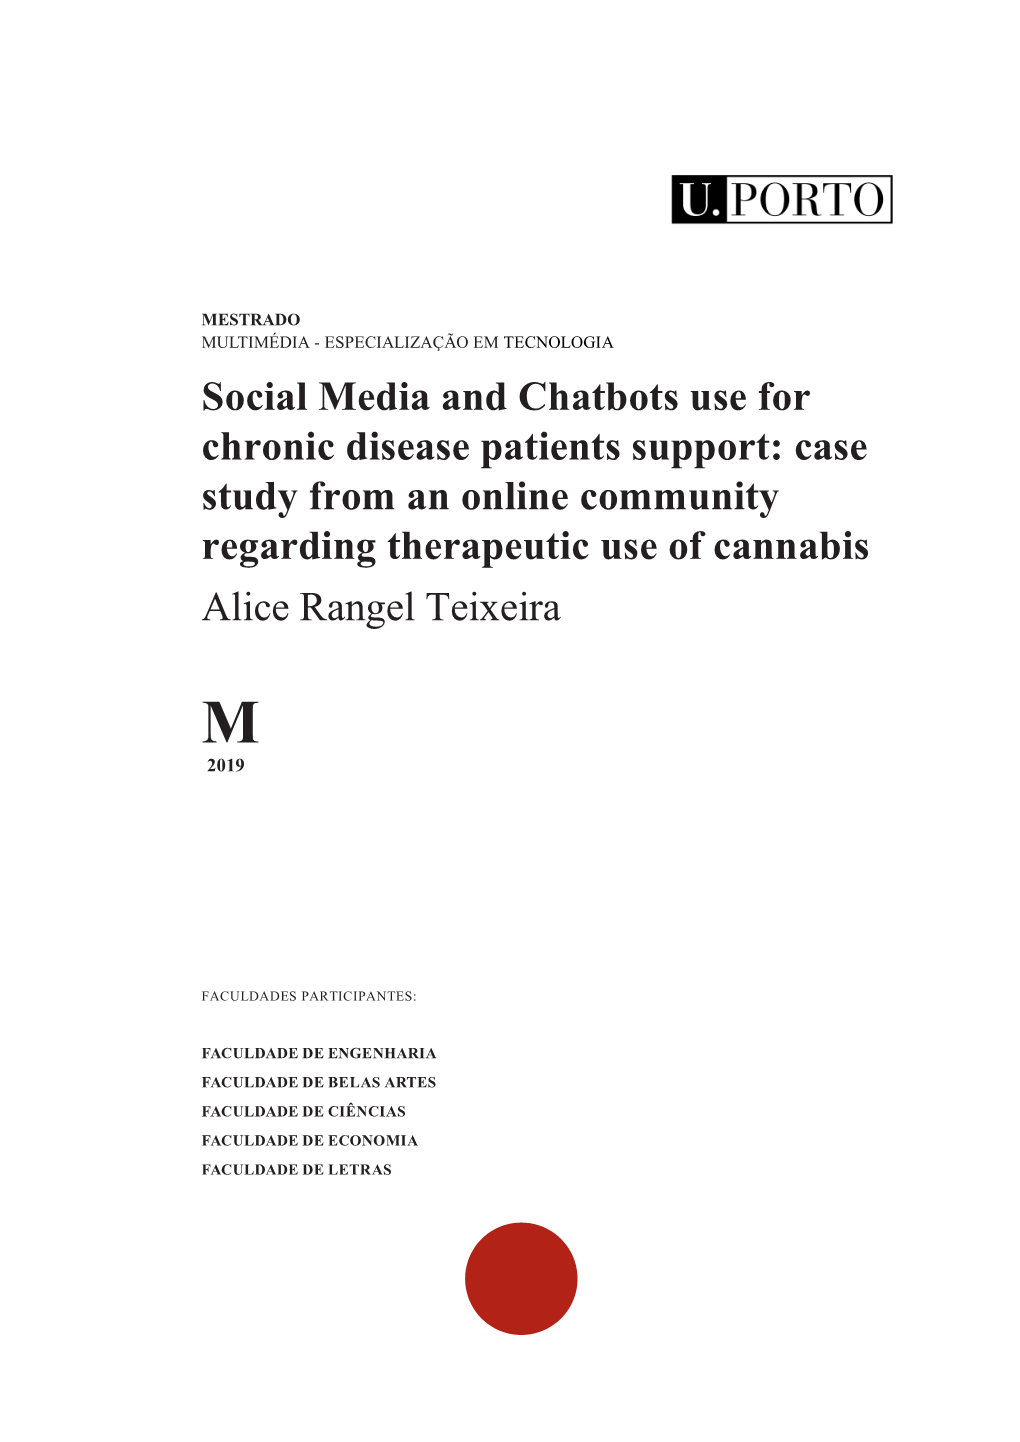 Social Media and Chatbots Use for Chronic Disease Patients Support: Case Study from an Online Community Regarding Therapeutic Use of Cannabis